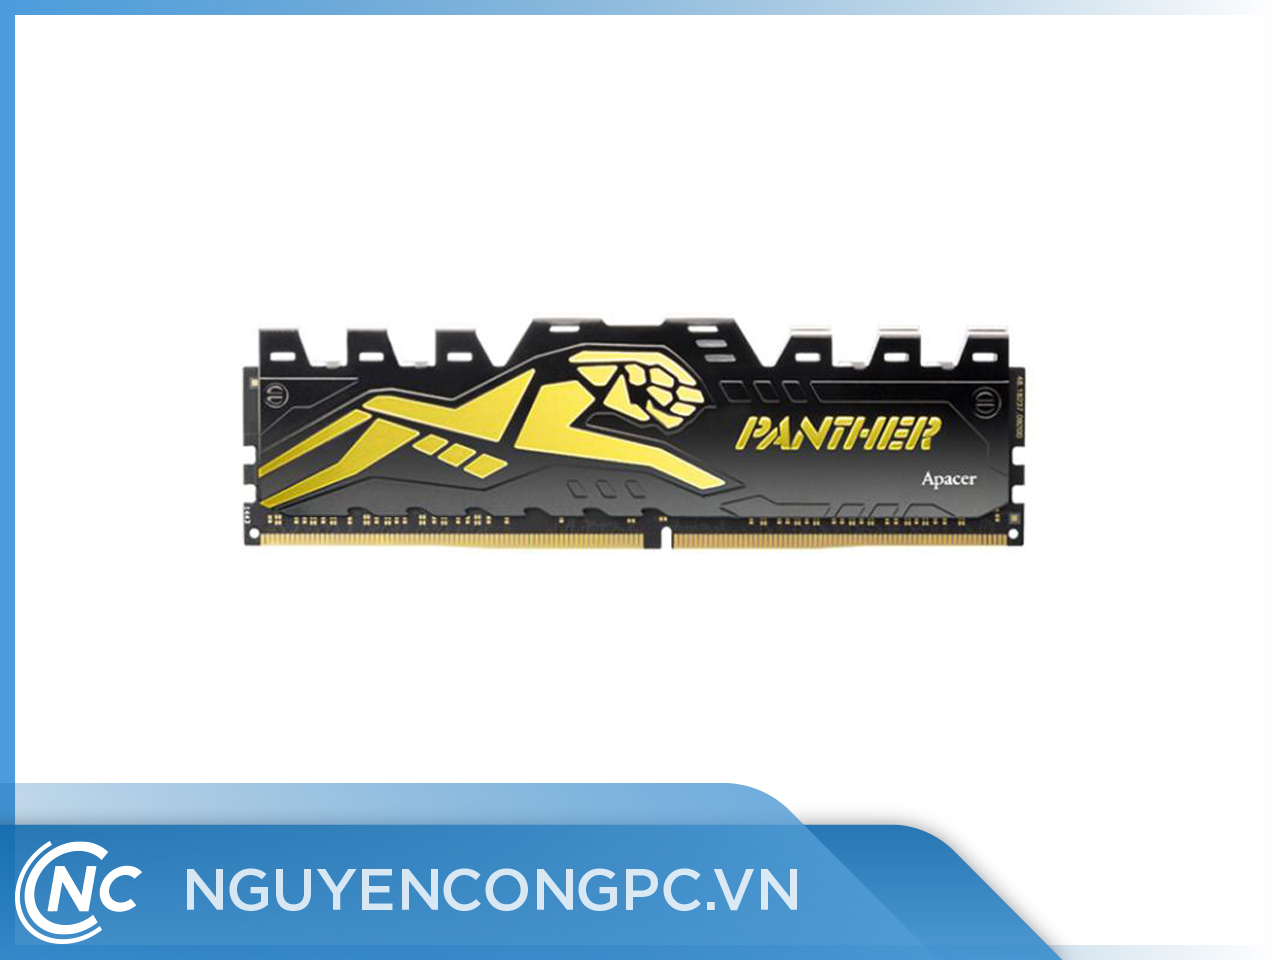 Ram Apacer OC Panther Golden 8GB (1x8GB) DDR4 3200Mhz